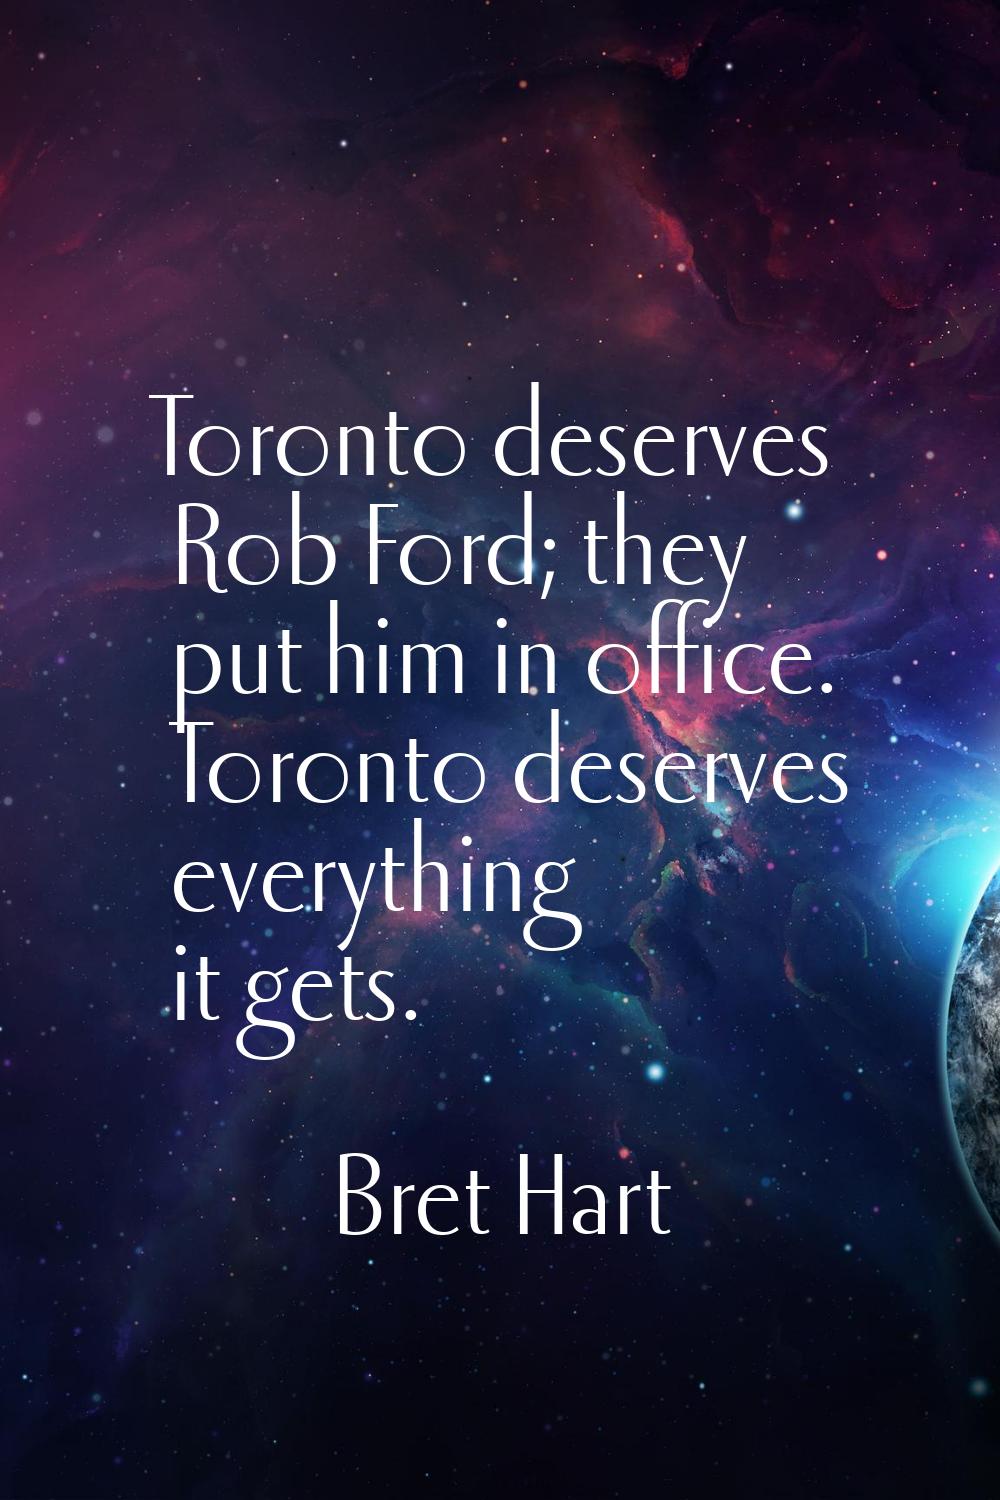 Toronto deserves Rob Ford; they put him in office. Toronto deserves everything it gets.